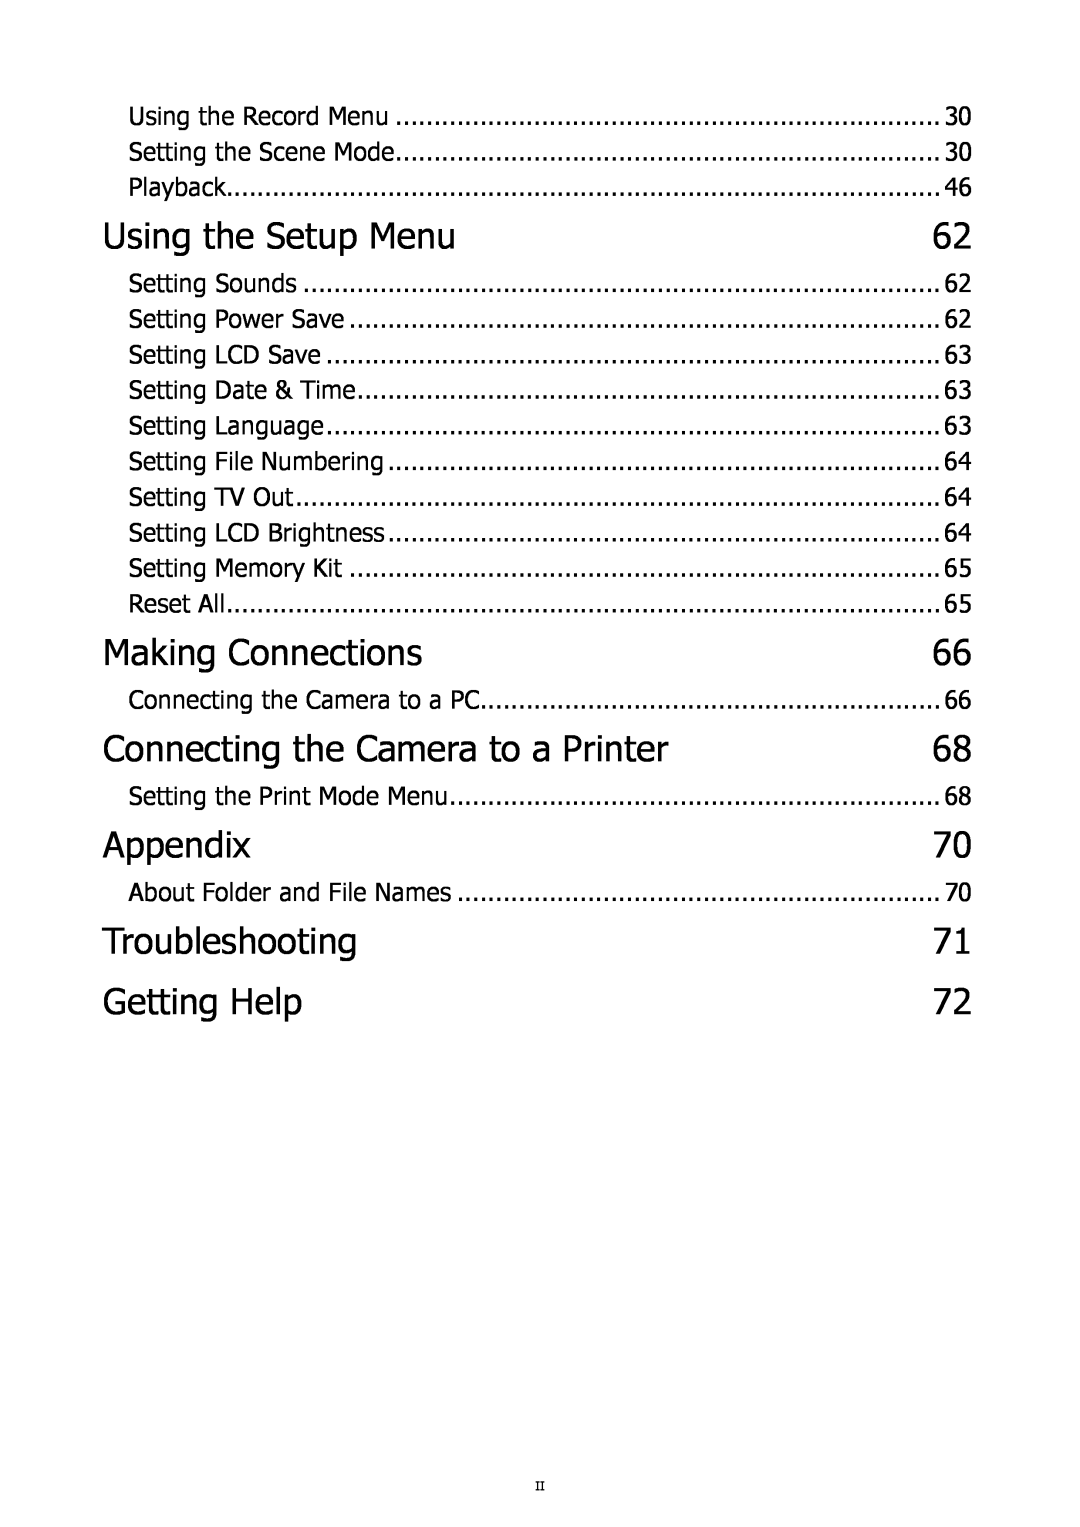 HP SW450 manual Using the Setup Menu, Making Connections, Connecting the Camera to a Printer, Appendix, Troubleshooting 